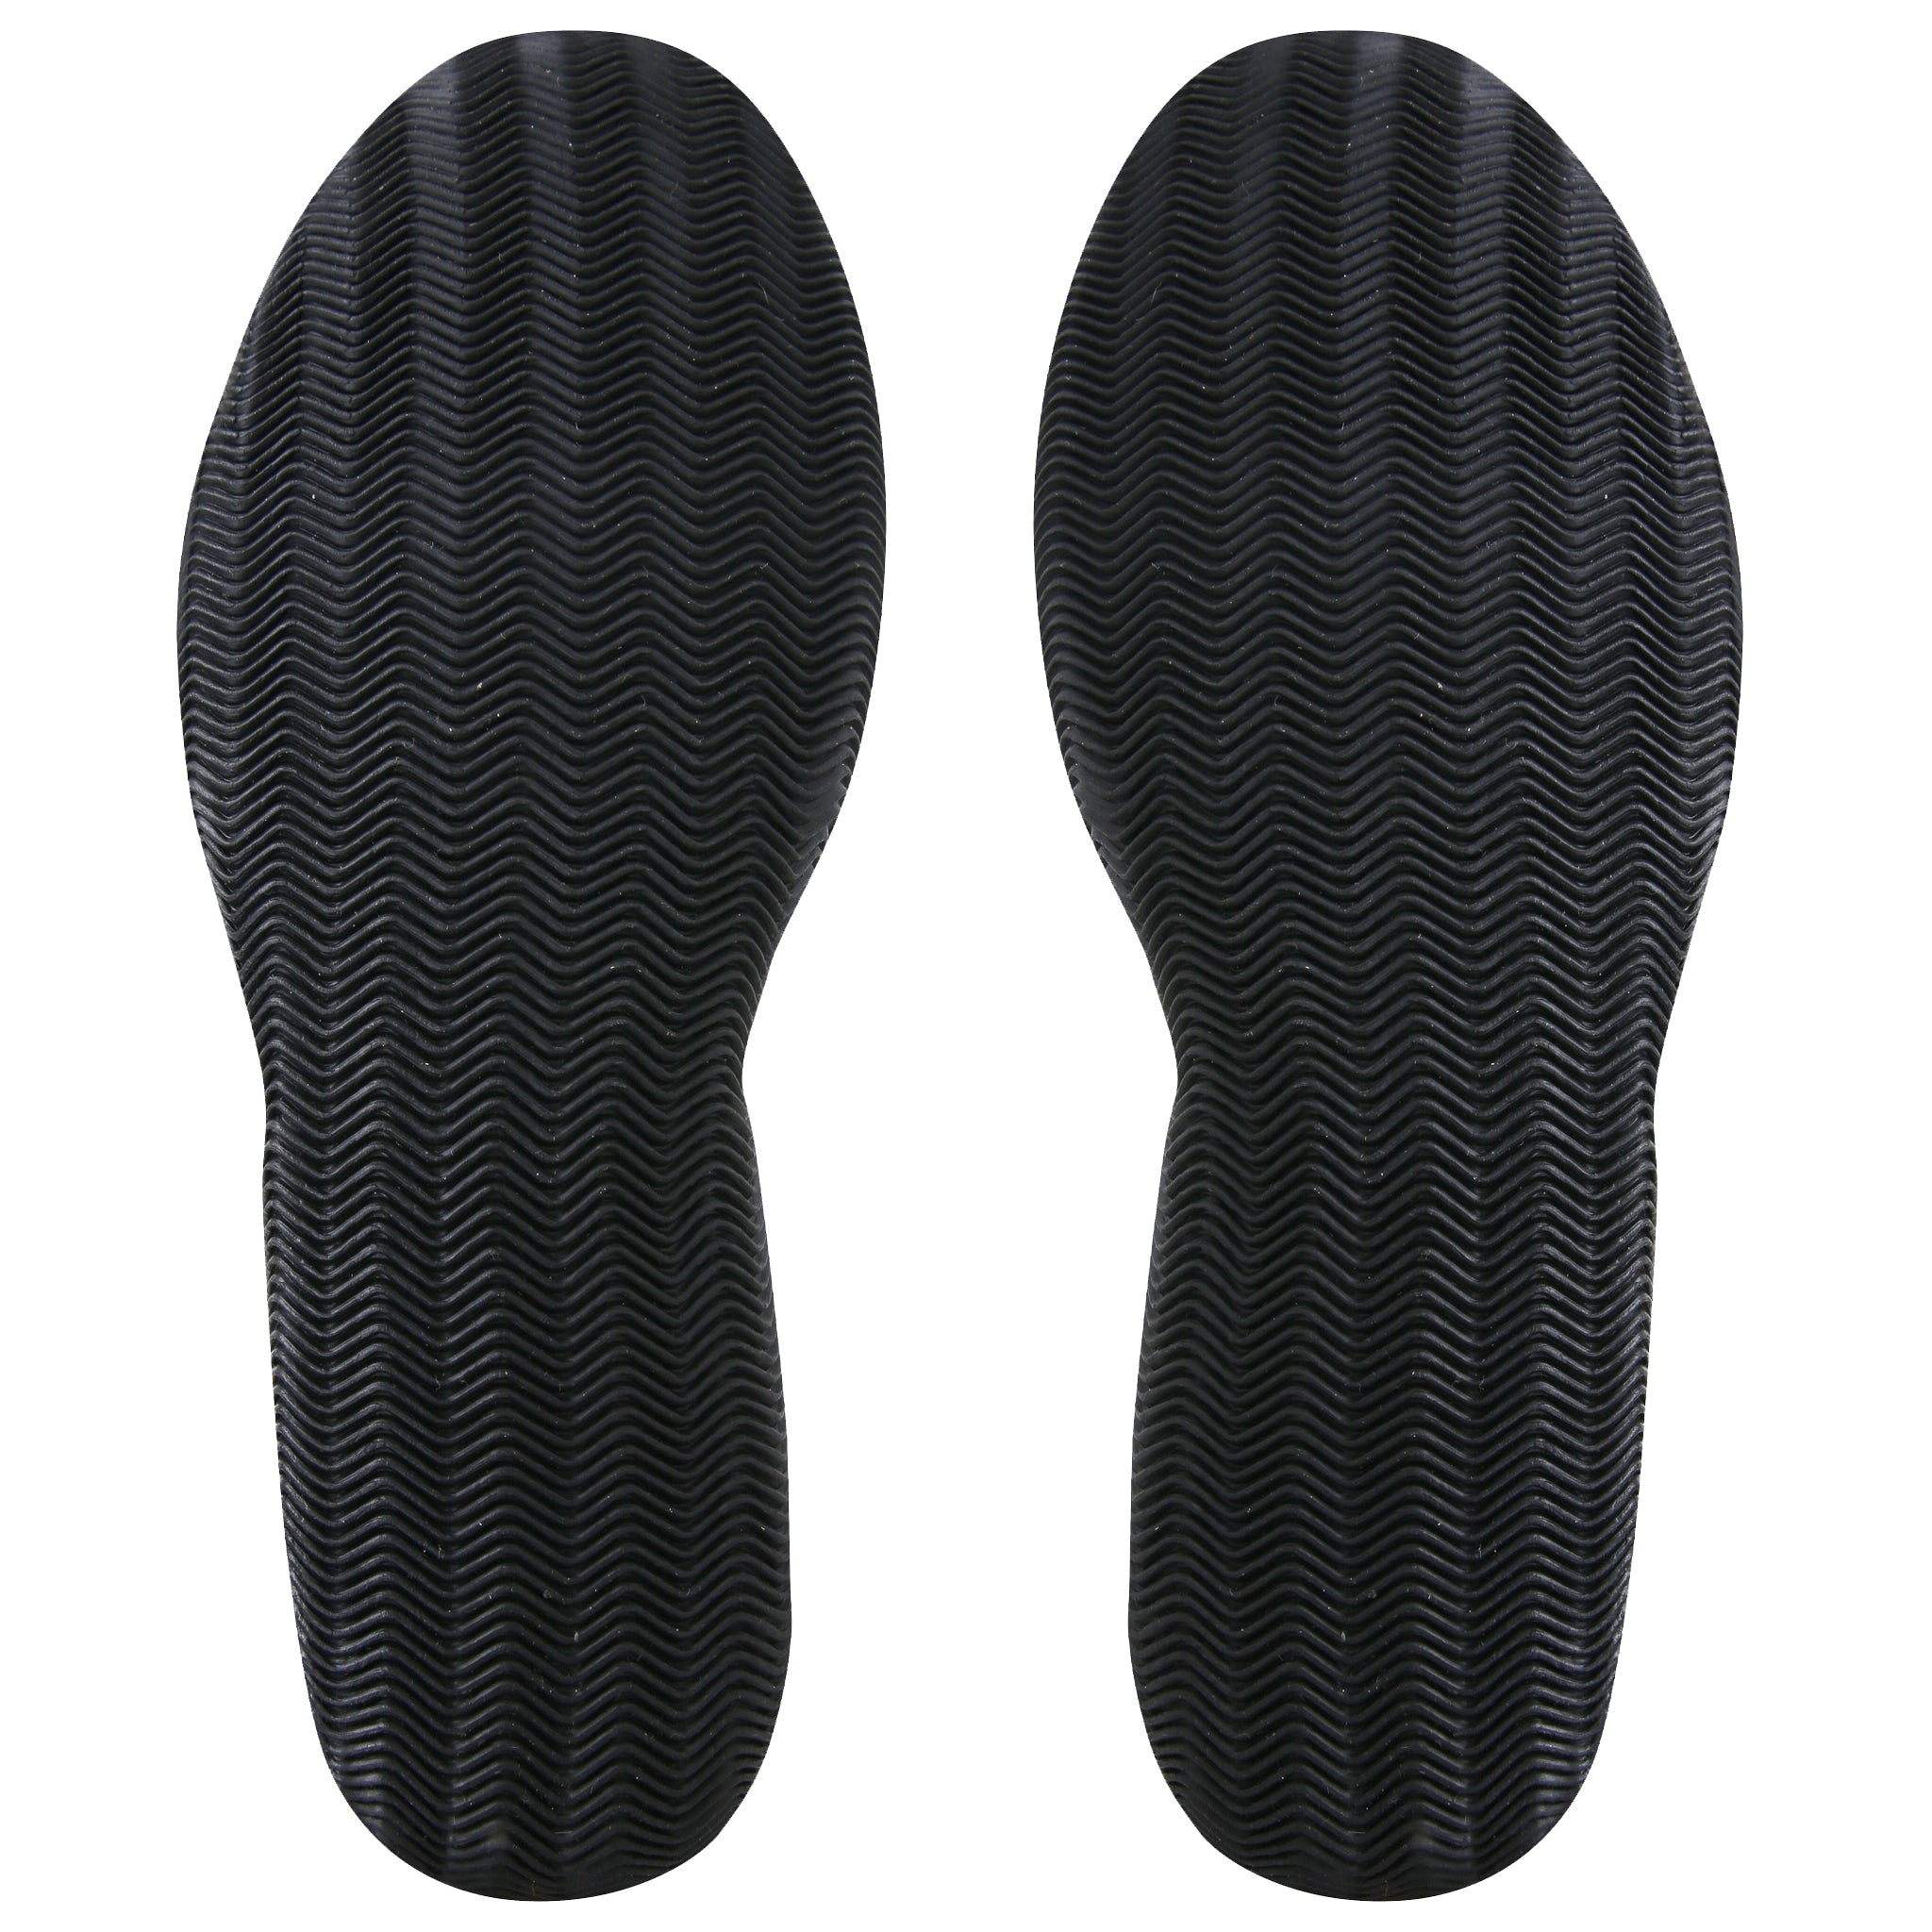 Typhoon Ventnor5 Pull-on 5mm Wetsuit Boots | Soles